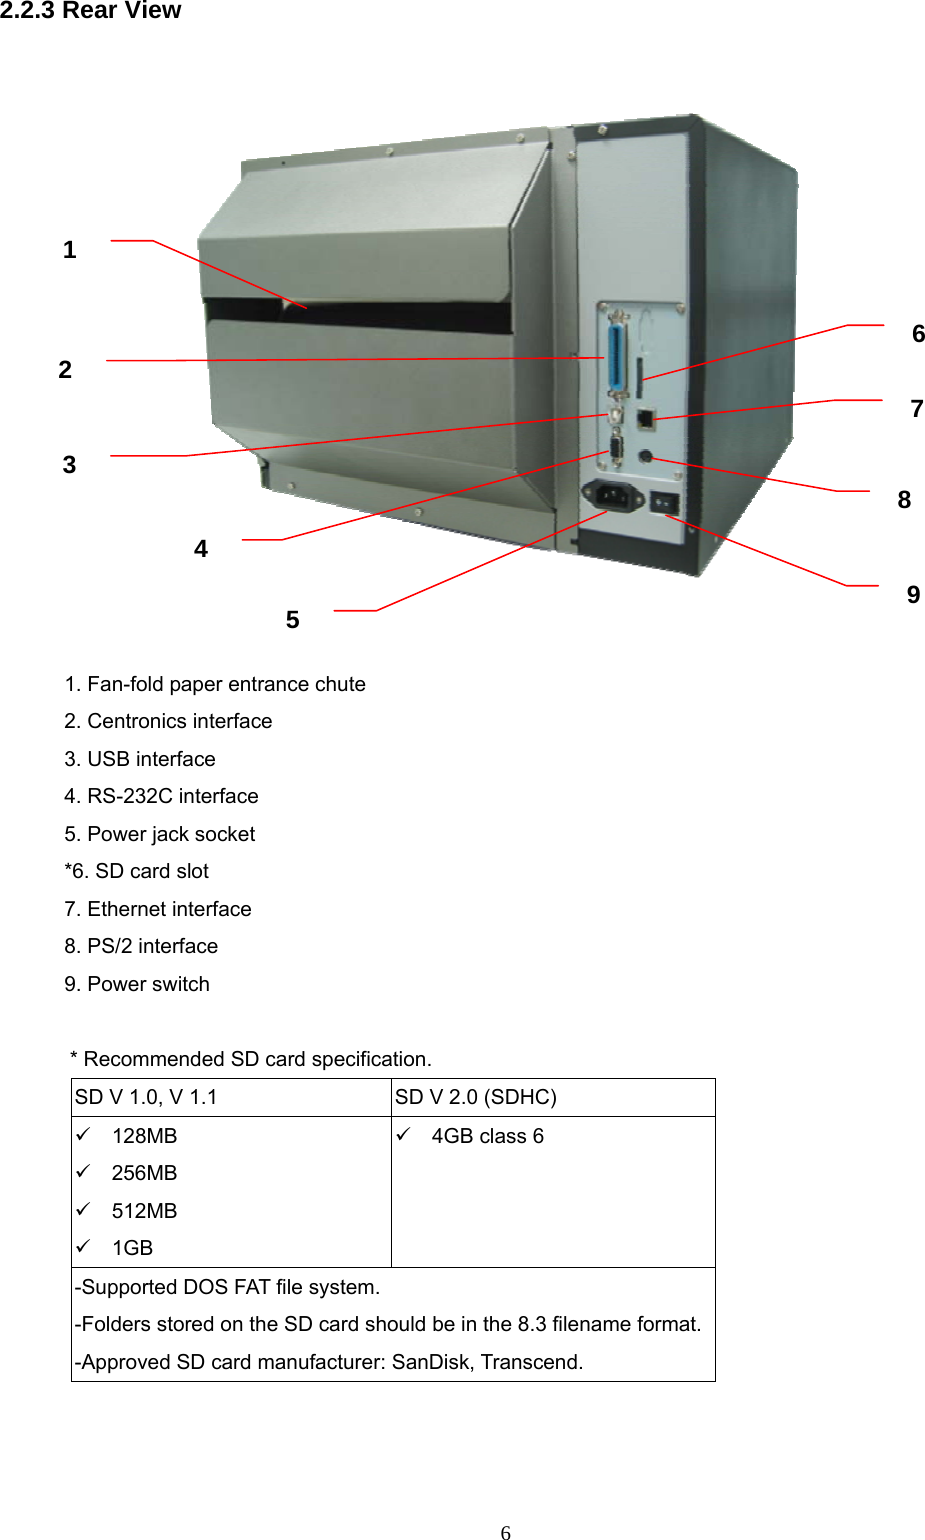  62.2.3 Rear View    1. Fan-fold paper entrance chute 2. Centronics interface 3. USB interface 4. RS-232C interface 5. Power jack socket *6. SD card slot   7. Ethernet interface   8. PS/2 interface   9. Power switch    * Recommended SD card specification. SD V 1.0, V 1.1  SD V 2.0 (SDHC)  128MB   256MB   512MB   1GB   4GB class 6 -Supported DOS FAT file system. -Folders stored on the SD card should be in the 8.3 filename format.-Approved SD card manufacturer: SanDisk, Transcend. 1 3 5 4 2 9 6 7 8 